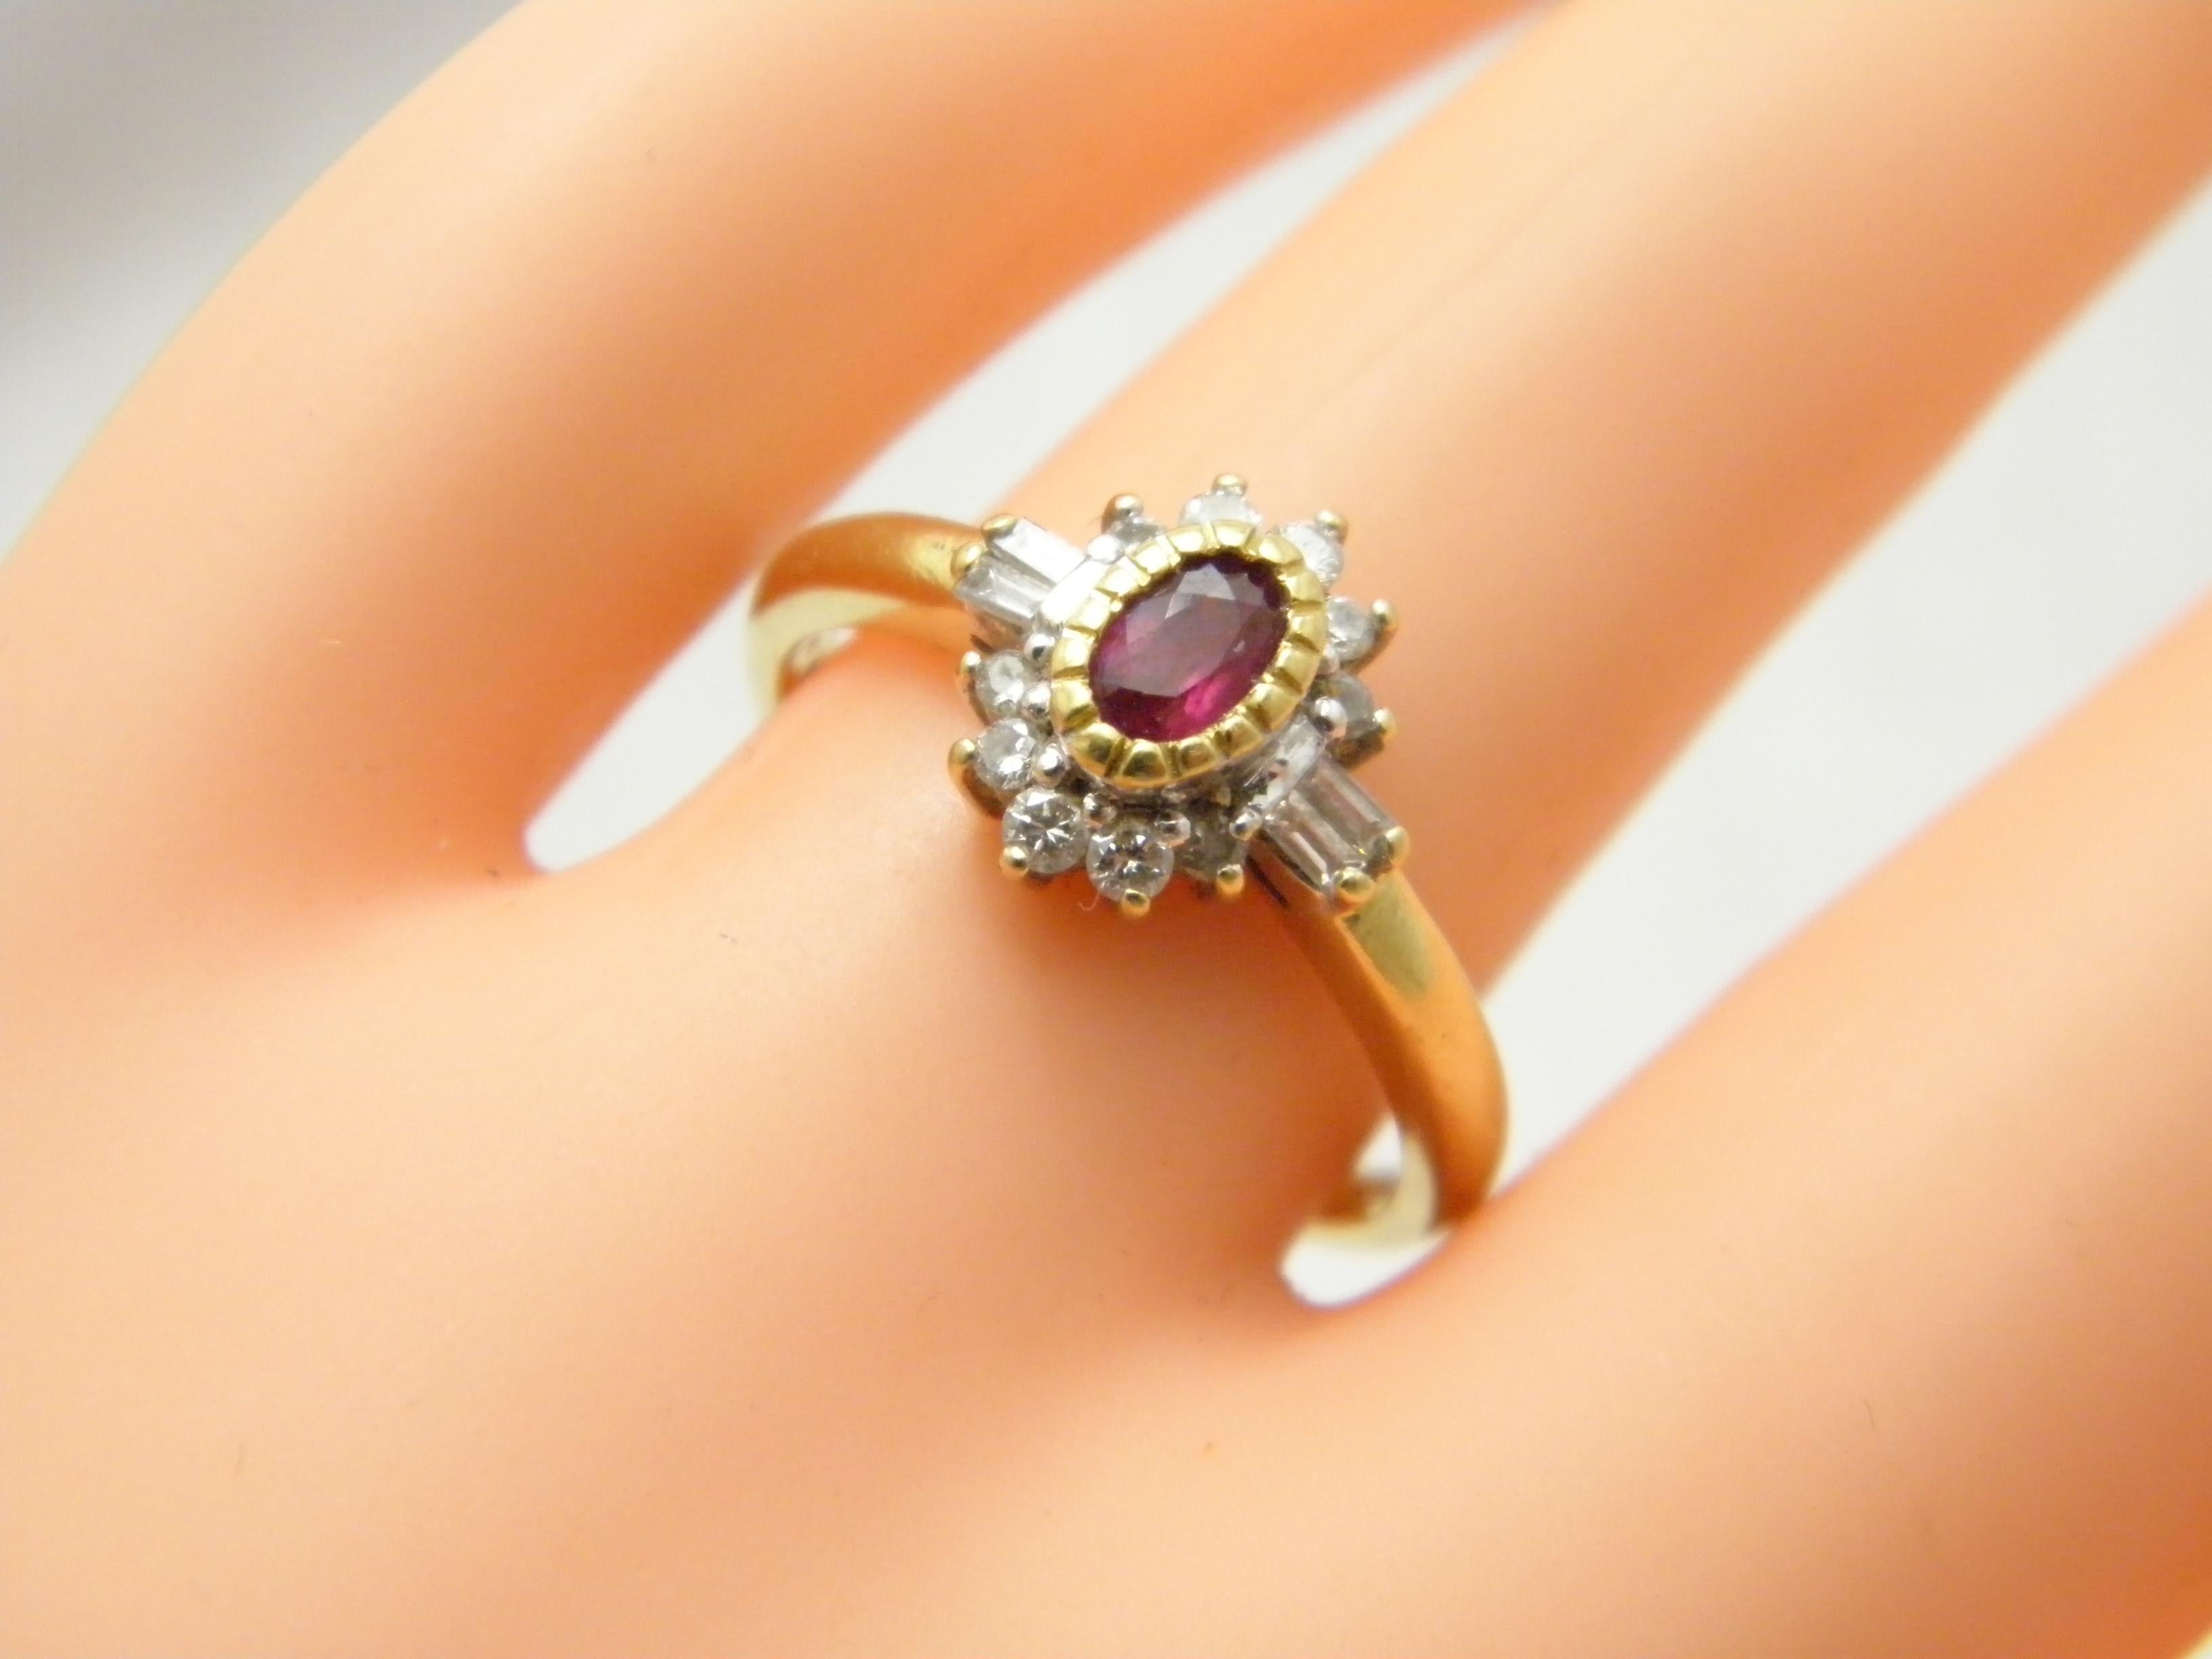 A very special item:
18CT GOLD HEAVY AND THICK RUBY AND DIAMOND CLUSTER RING

DETAILS
Material: 18ct 750/000 Thick Yellow Gold with White Gold accents
This ring has a good thick shank hence ideal if resizing needed
Style: Classic cluster ring with